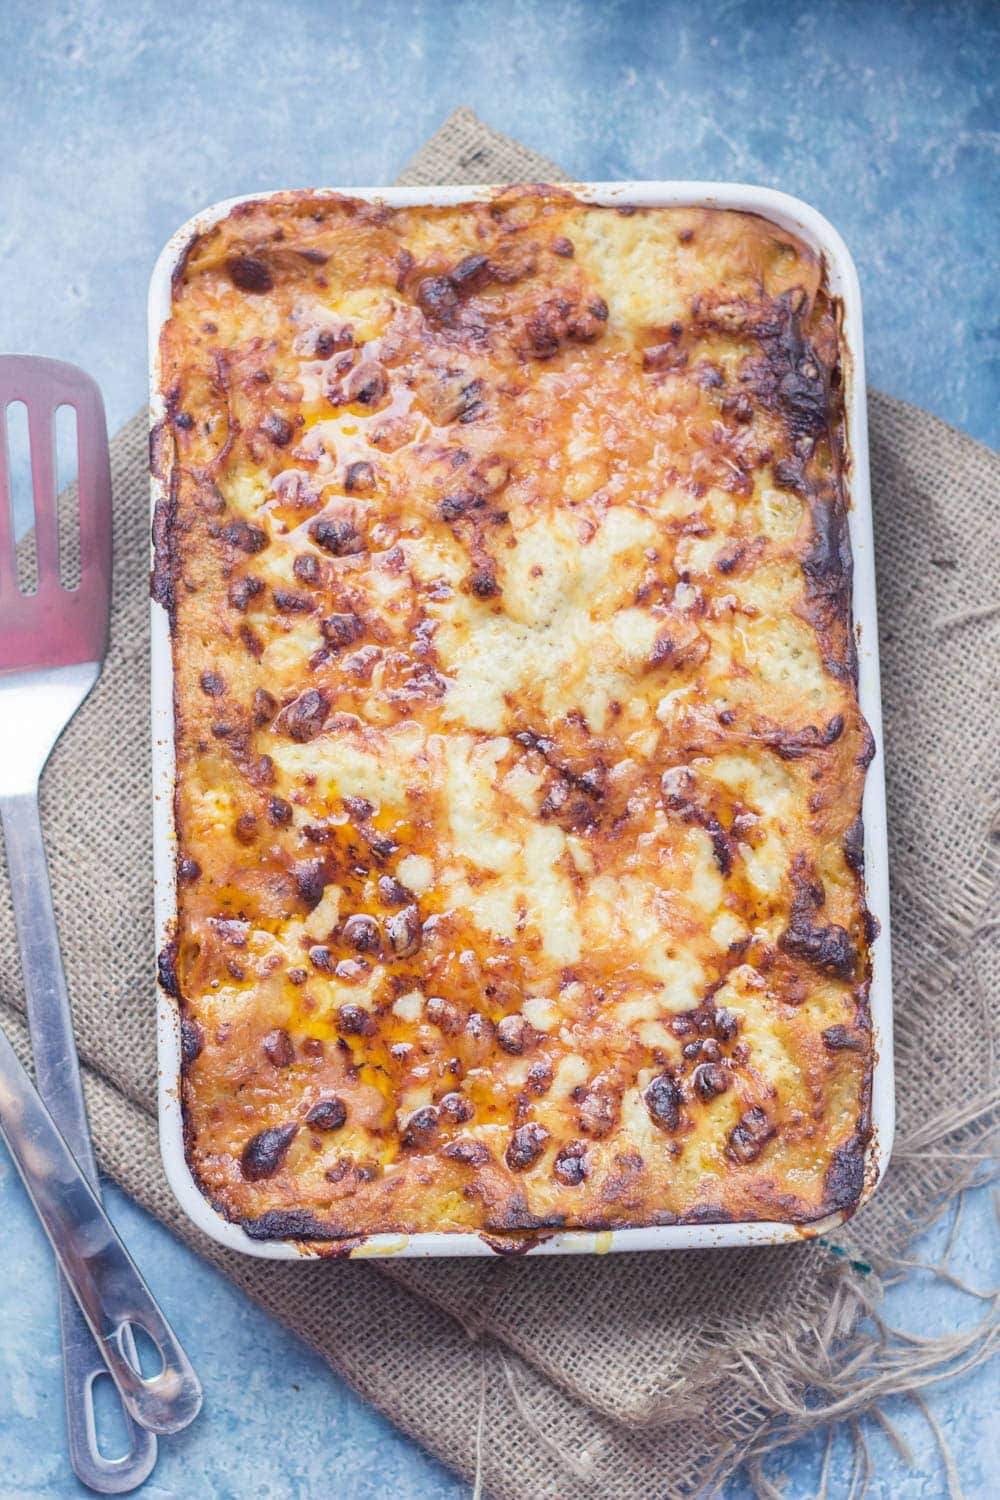 This recipe for a homemade classic beef lasagne is definitely worth the effort. There's nothing quite like a lasagne made from scratch!